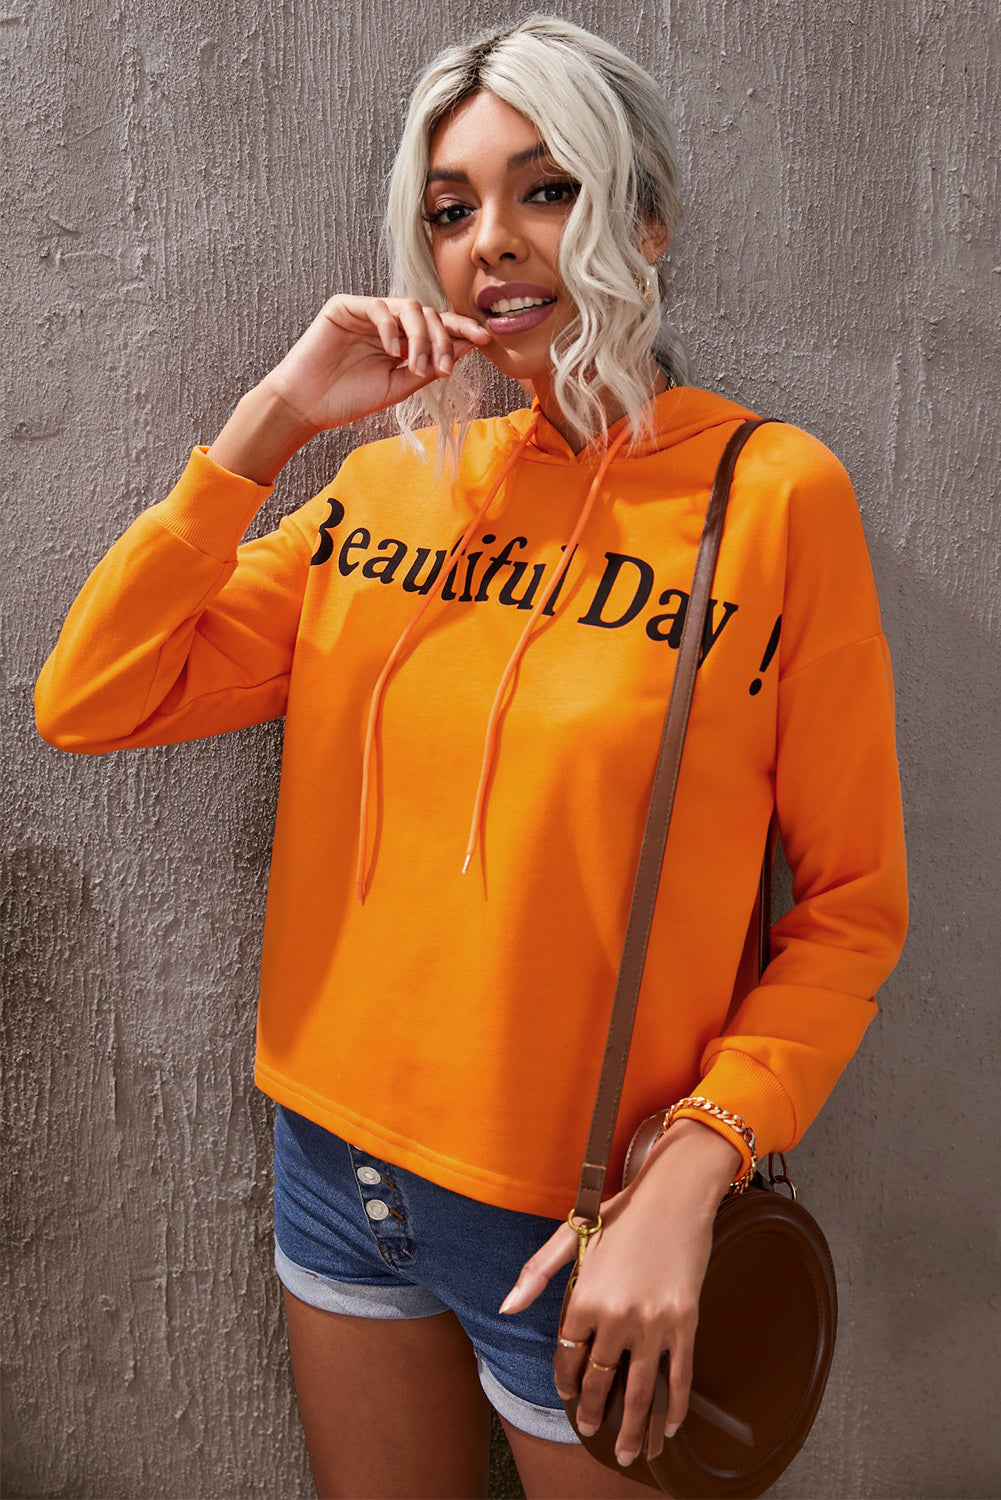 Womens Casual Beautiful Day Letters Graphic Hoodie